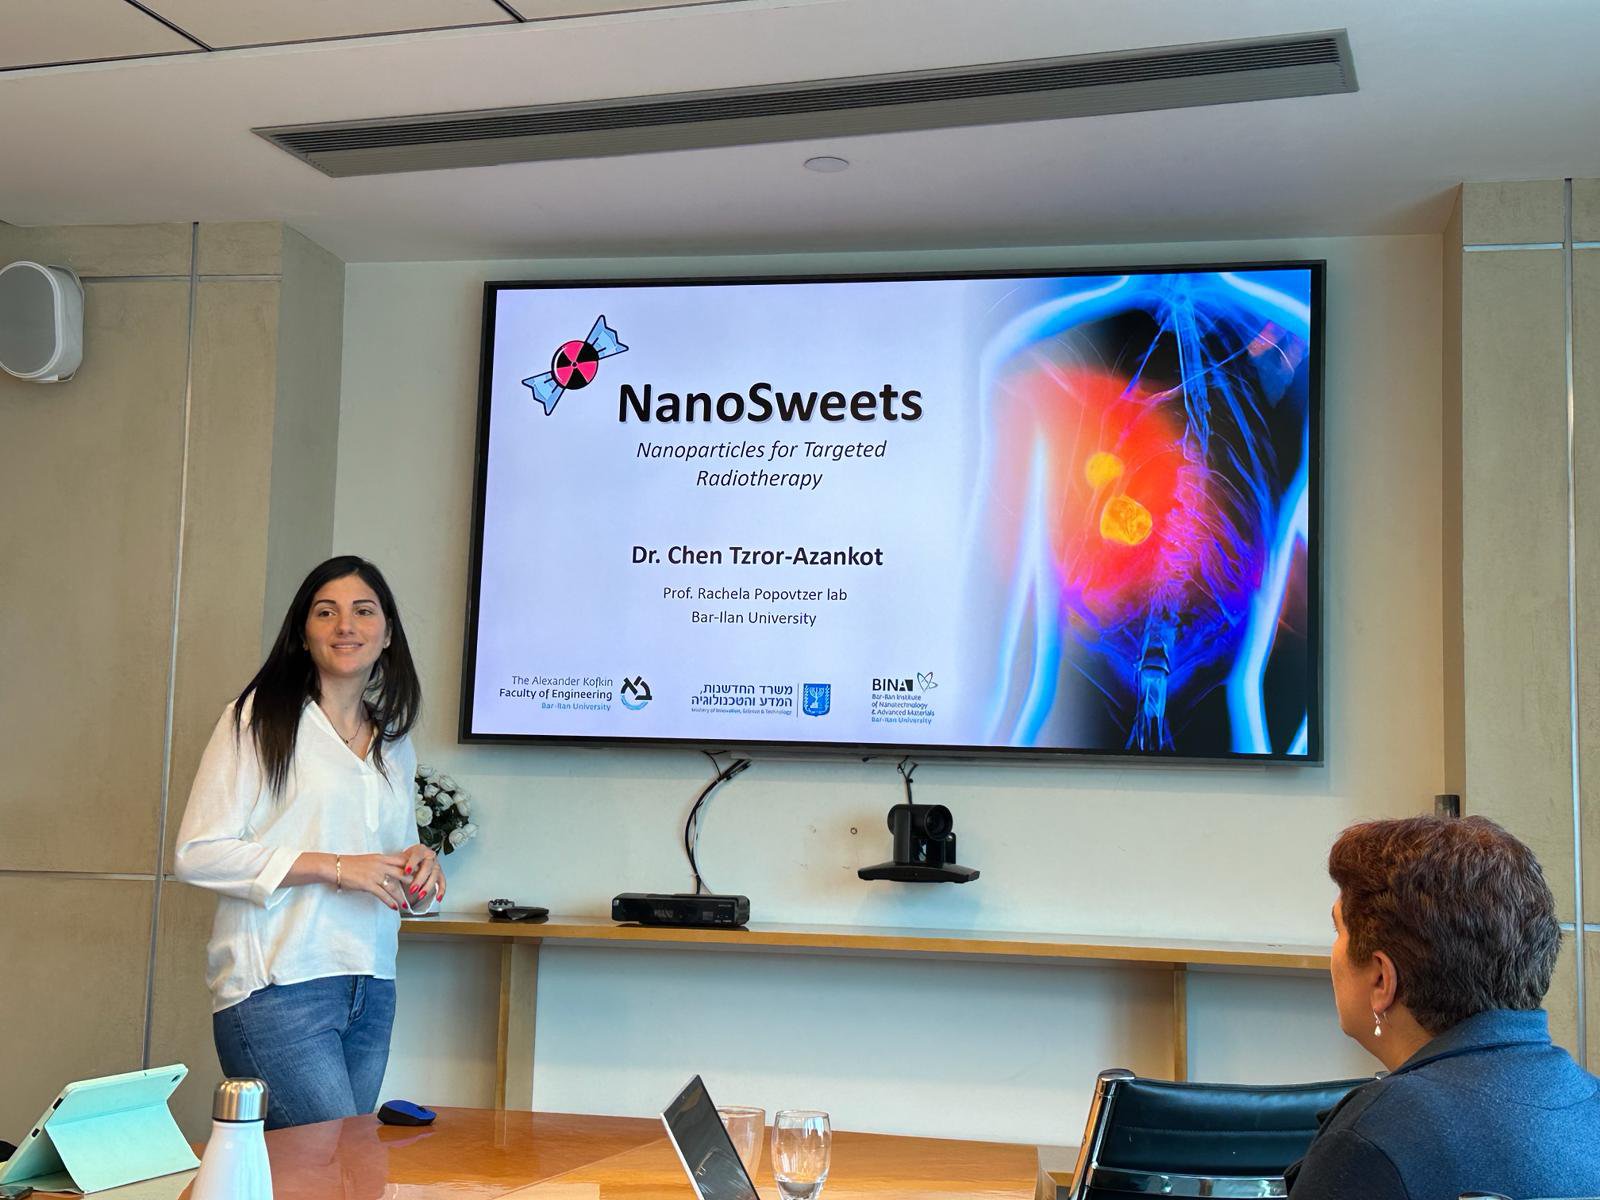 Excellent talk given by our postdoc Dr. Chen Tzror-Azankot, on her research project, Nanosweets: Nanoparticles for Targeted Radiotherapy, at the Ministry of Innovation, Science and Technology!